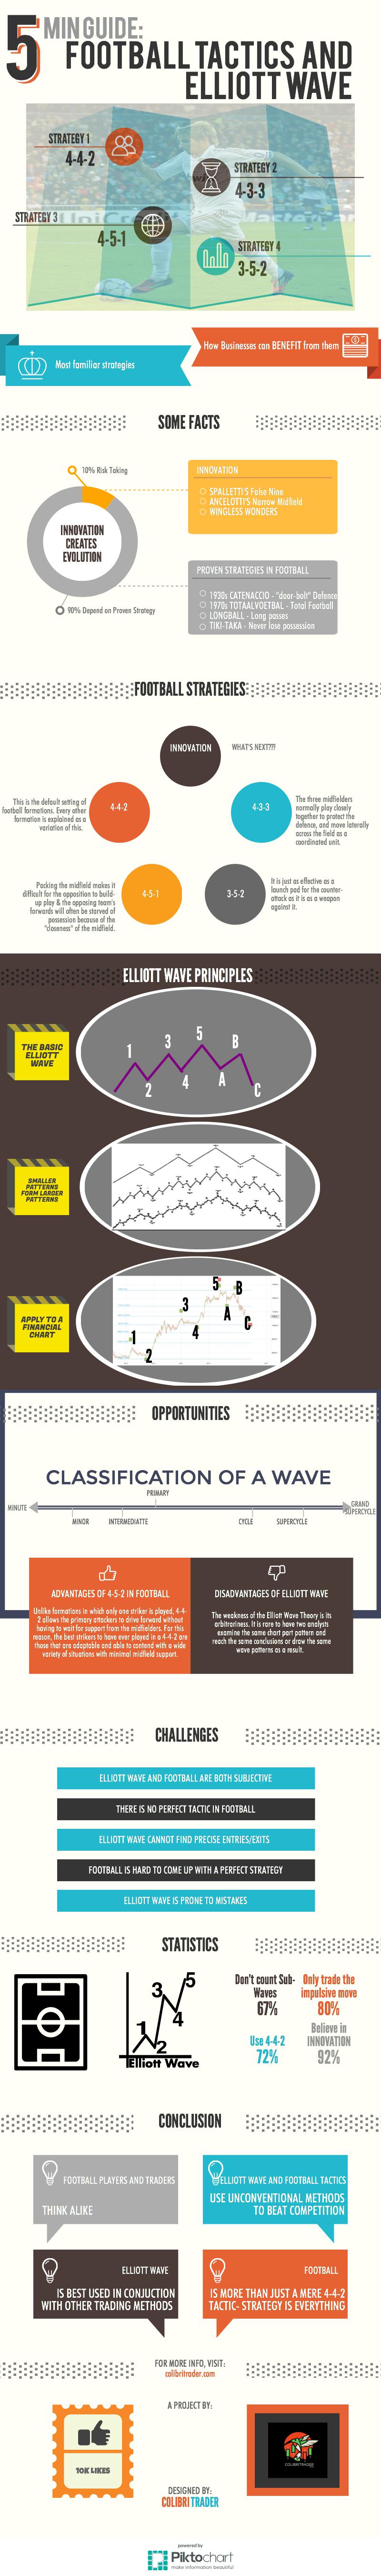 How Is Football Tactics Similar To Elliott Wave in Trading (Infographic)